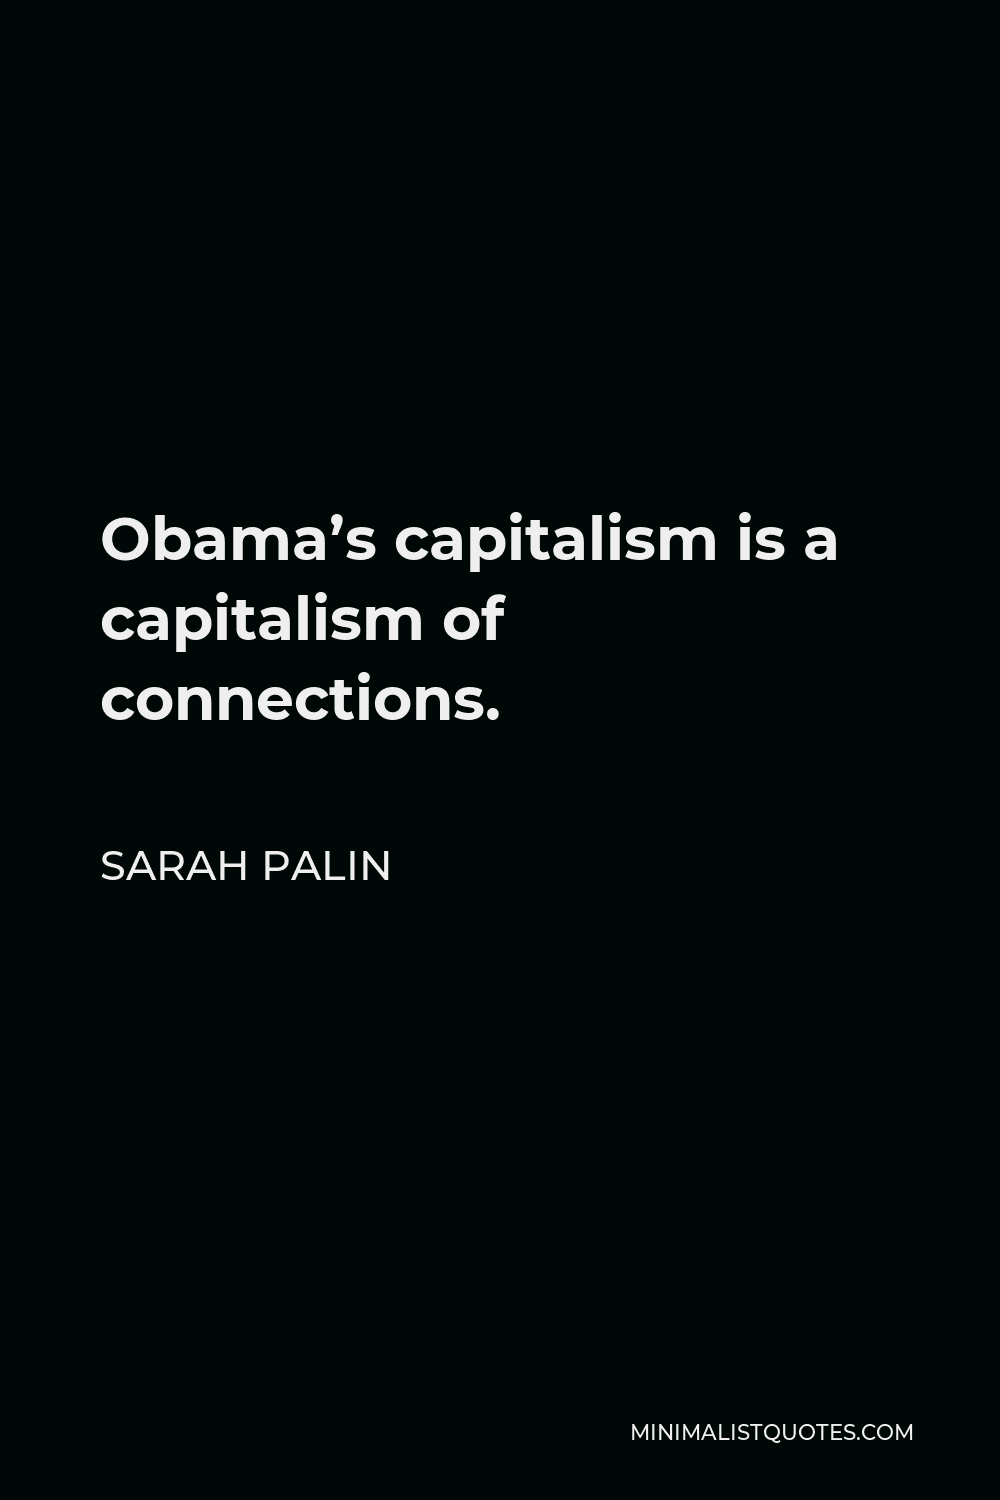 Sarah Palin Quote - Obama’s capitalism is a capitalism of connections.